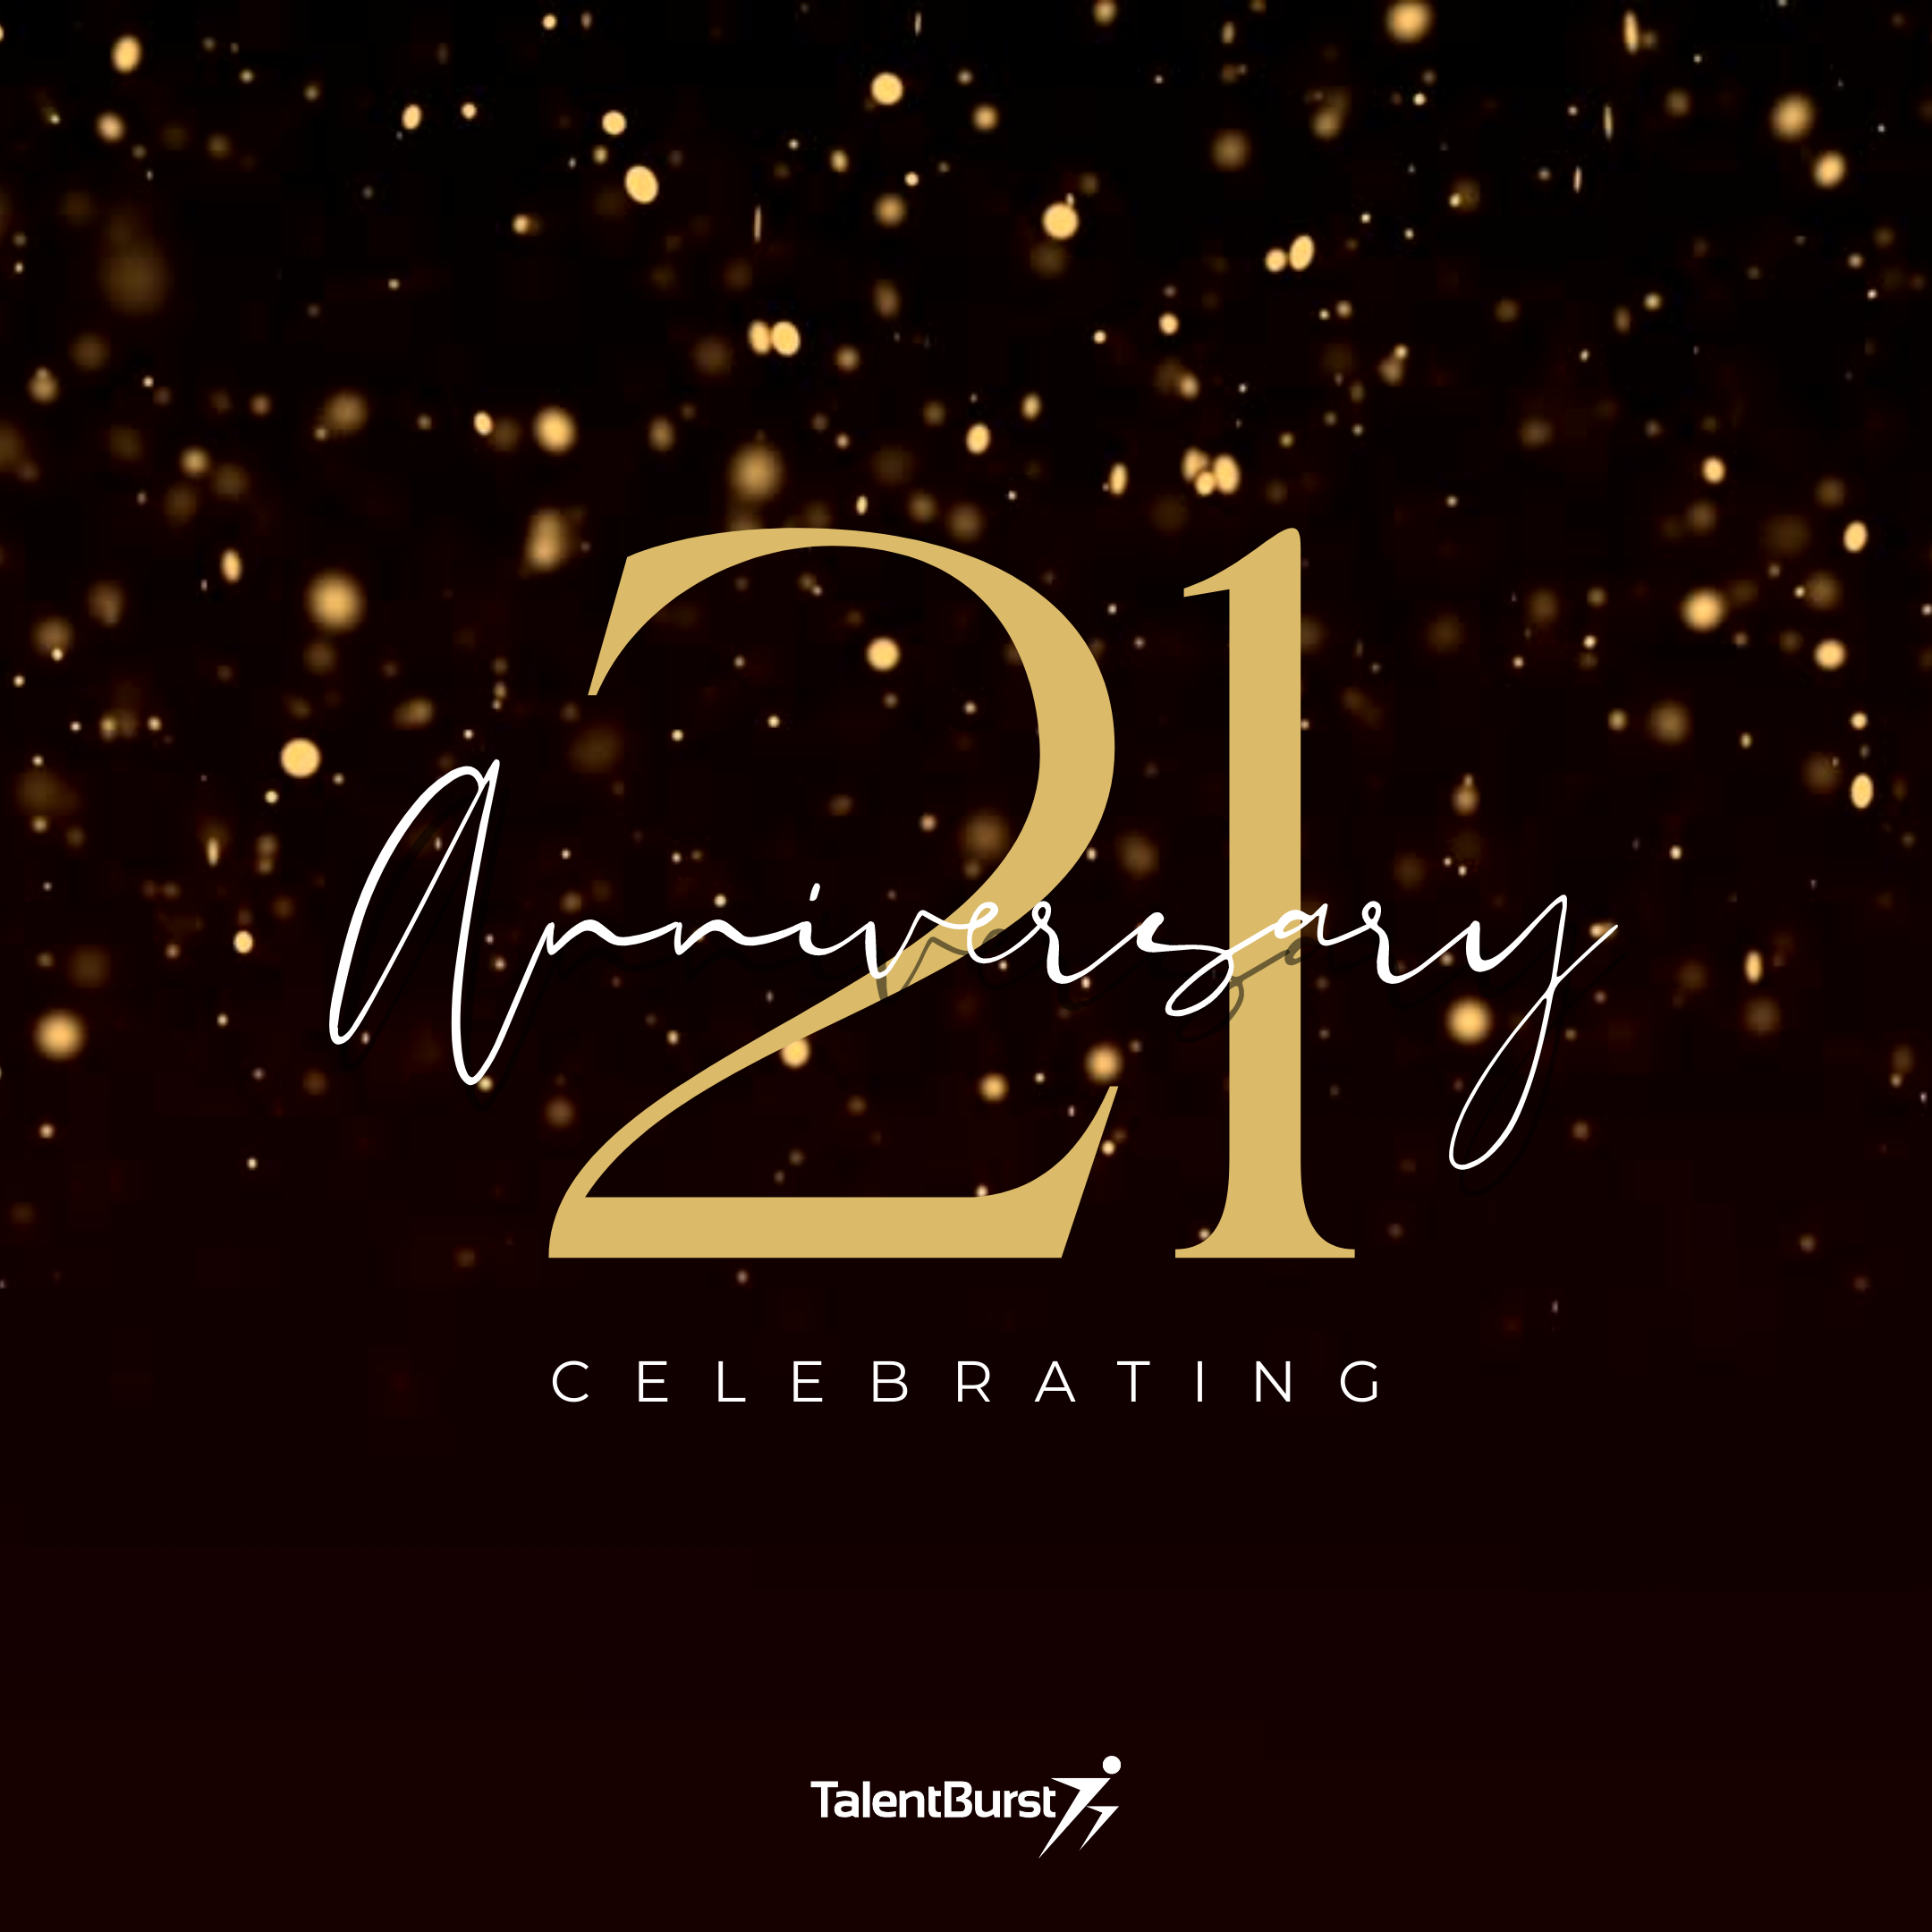 Celebrating TalentBurst's 21st Anniversary: A Legacy of Excellence